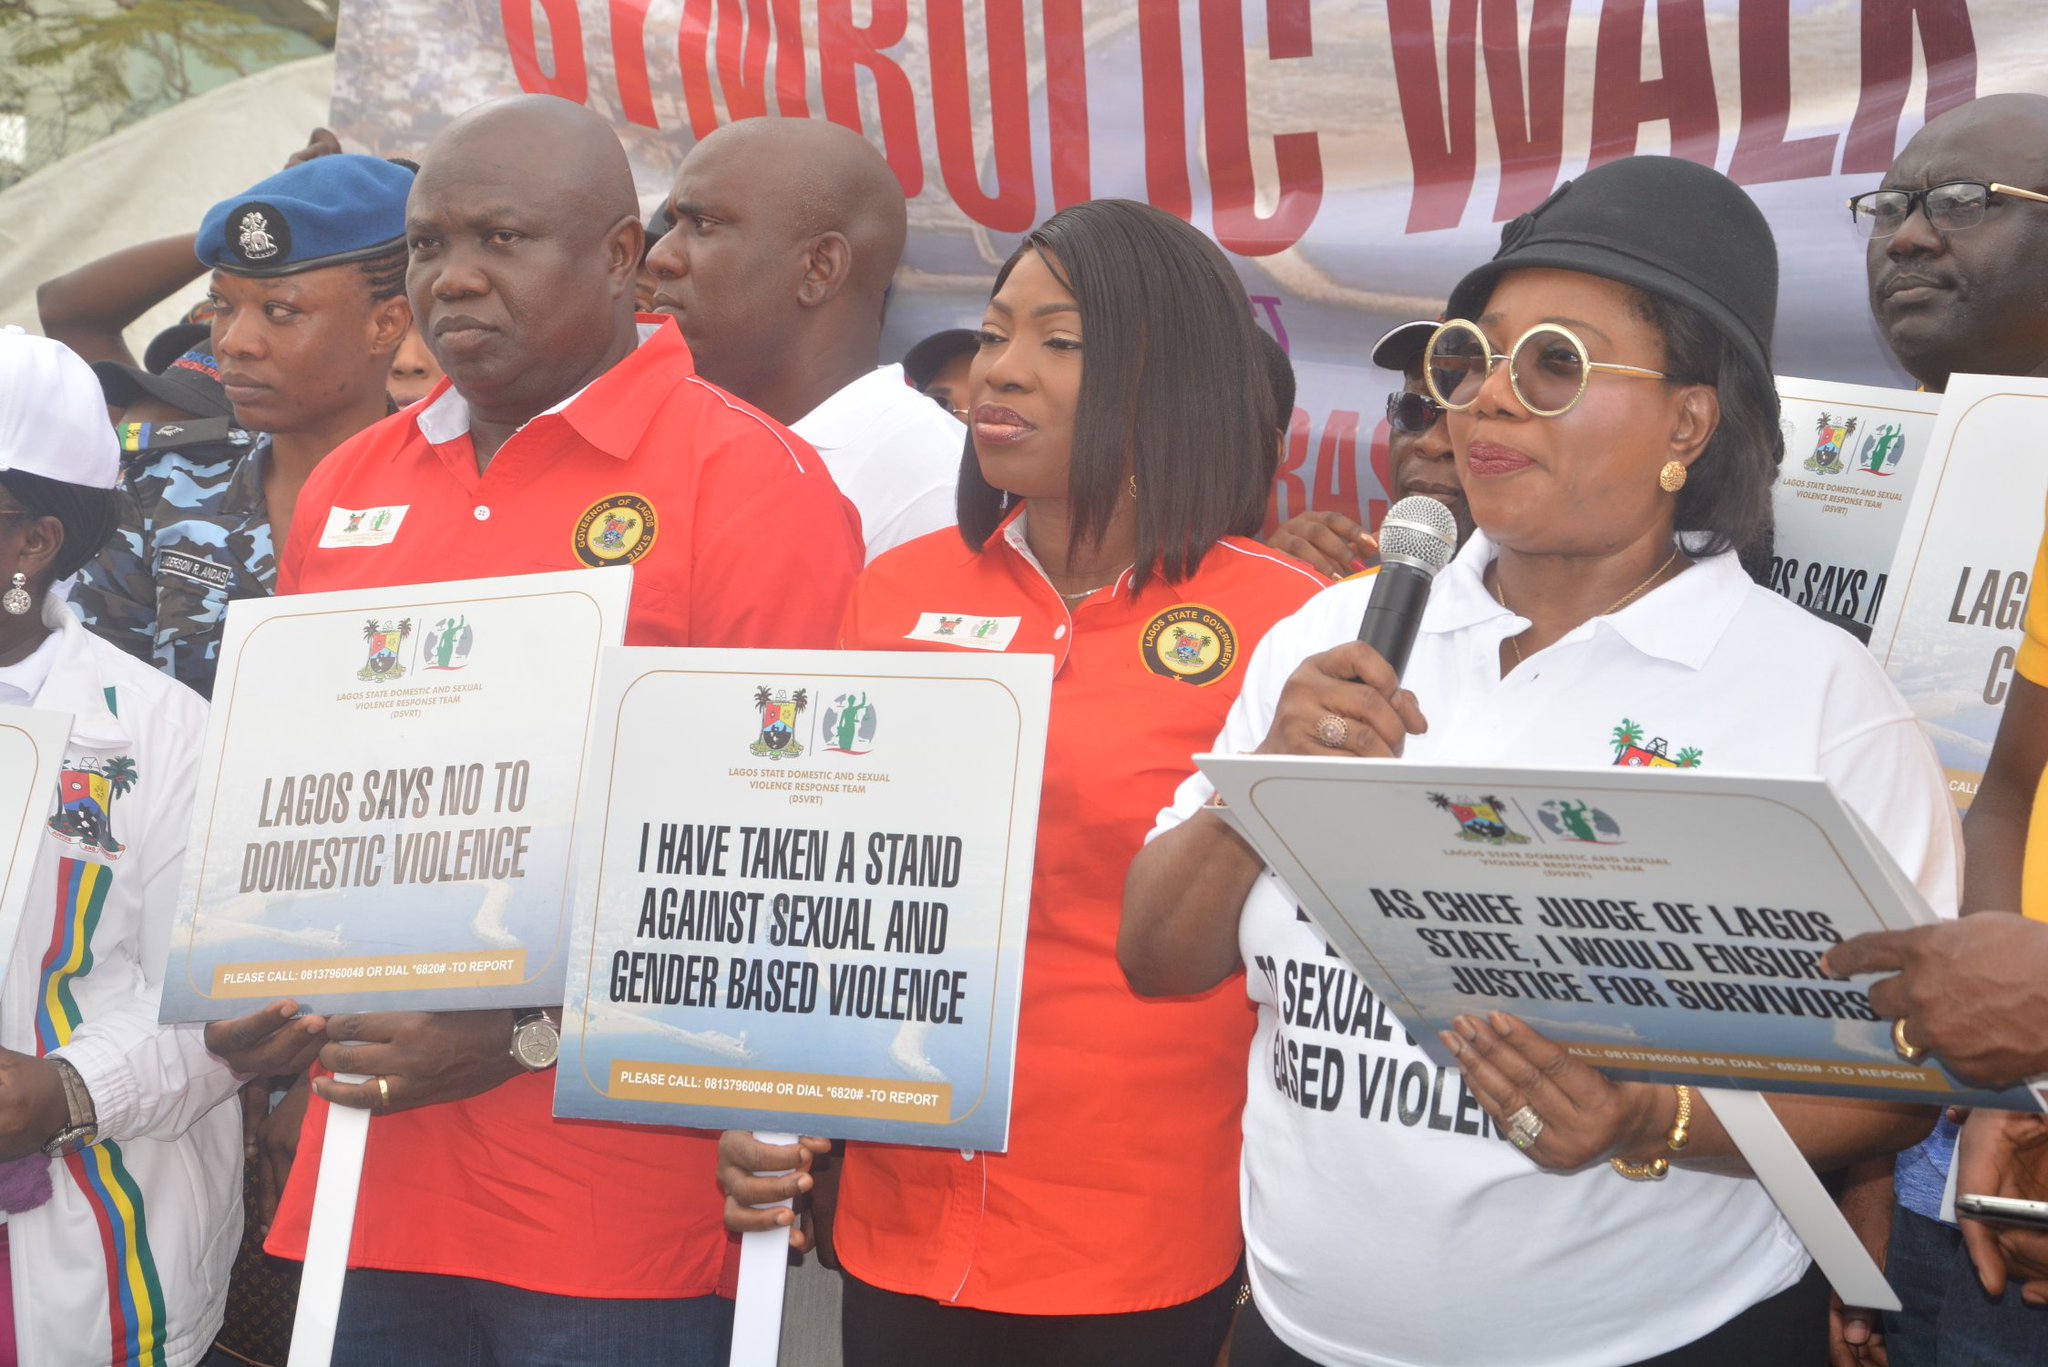 Gov Ambode, Chief Judge of Lagos and Others Walk Against Sexual And Gender Based Violence